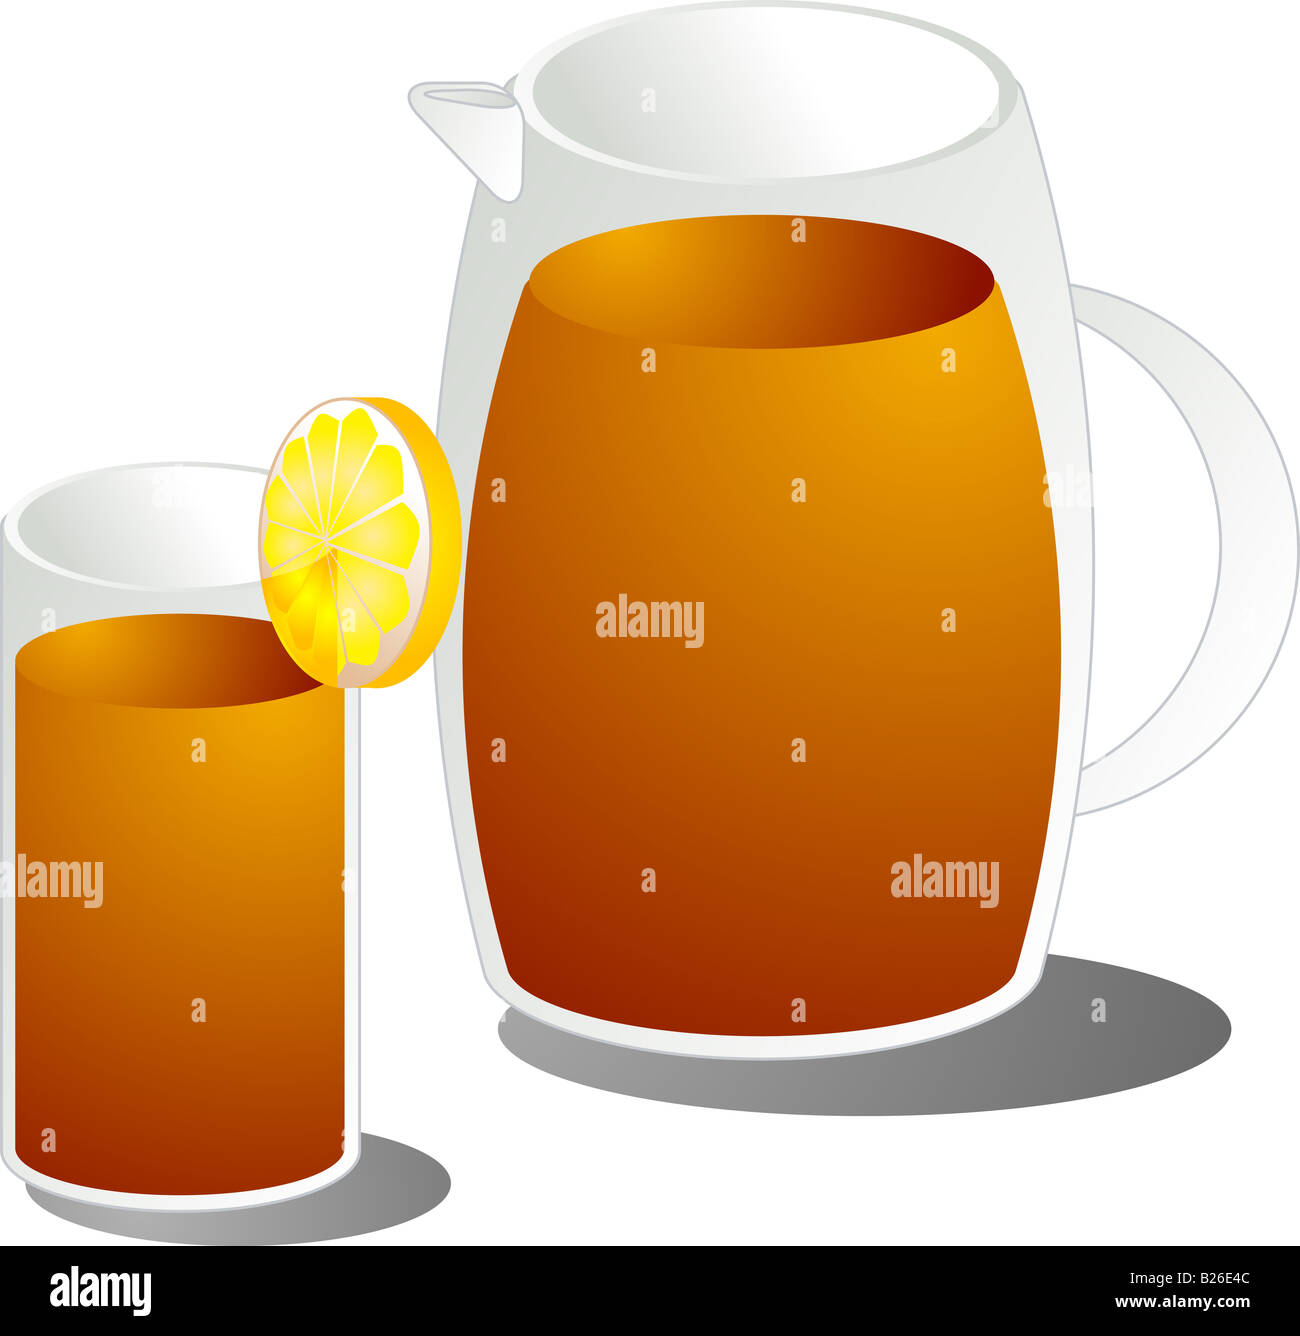 https://c8.alamy.com/comp/B26E4C/illustration-of-ice-tea-in-a-pitcher-and-a-glass-isometric-B26E4C.jpg